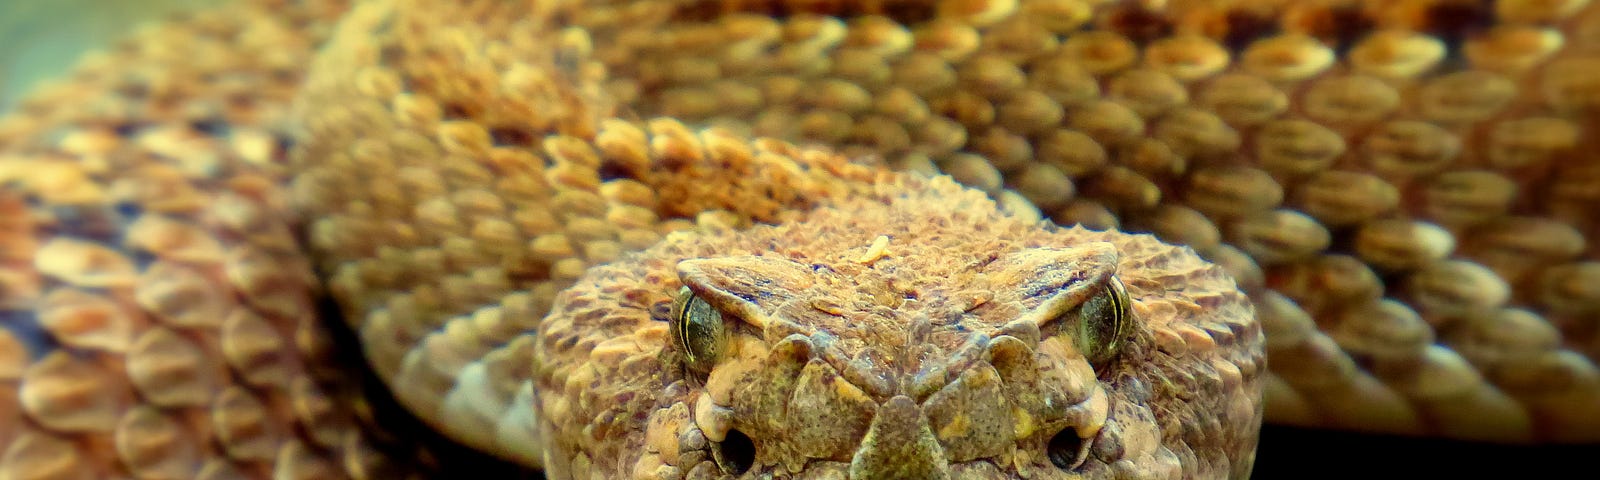 A rattlesnake with extended tongue looking at the camera